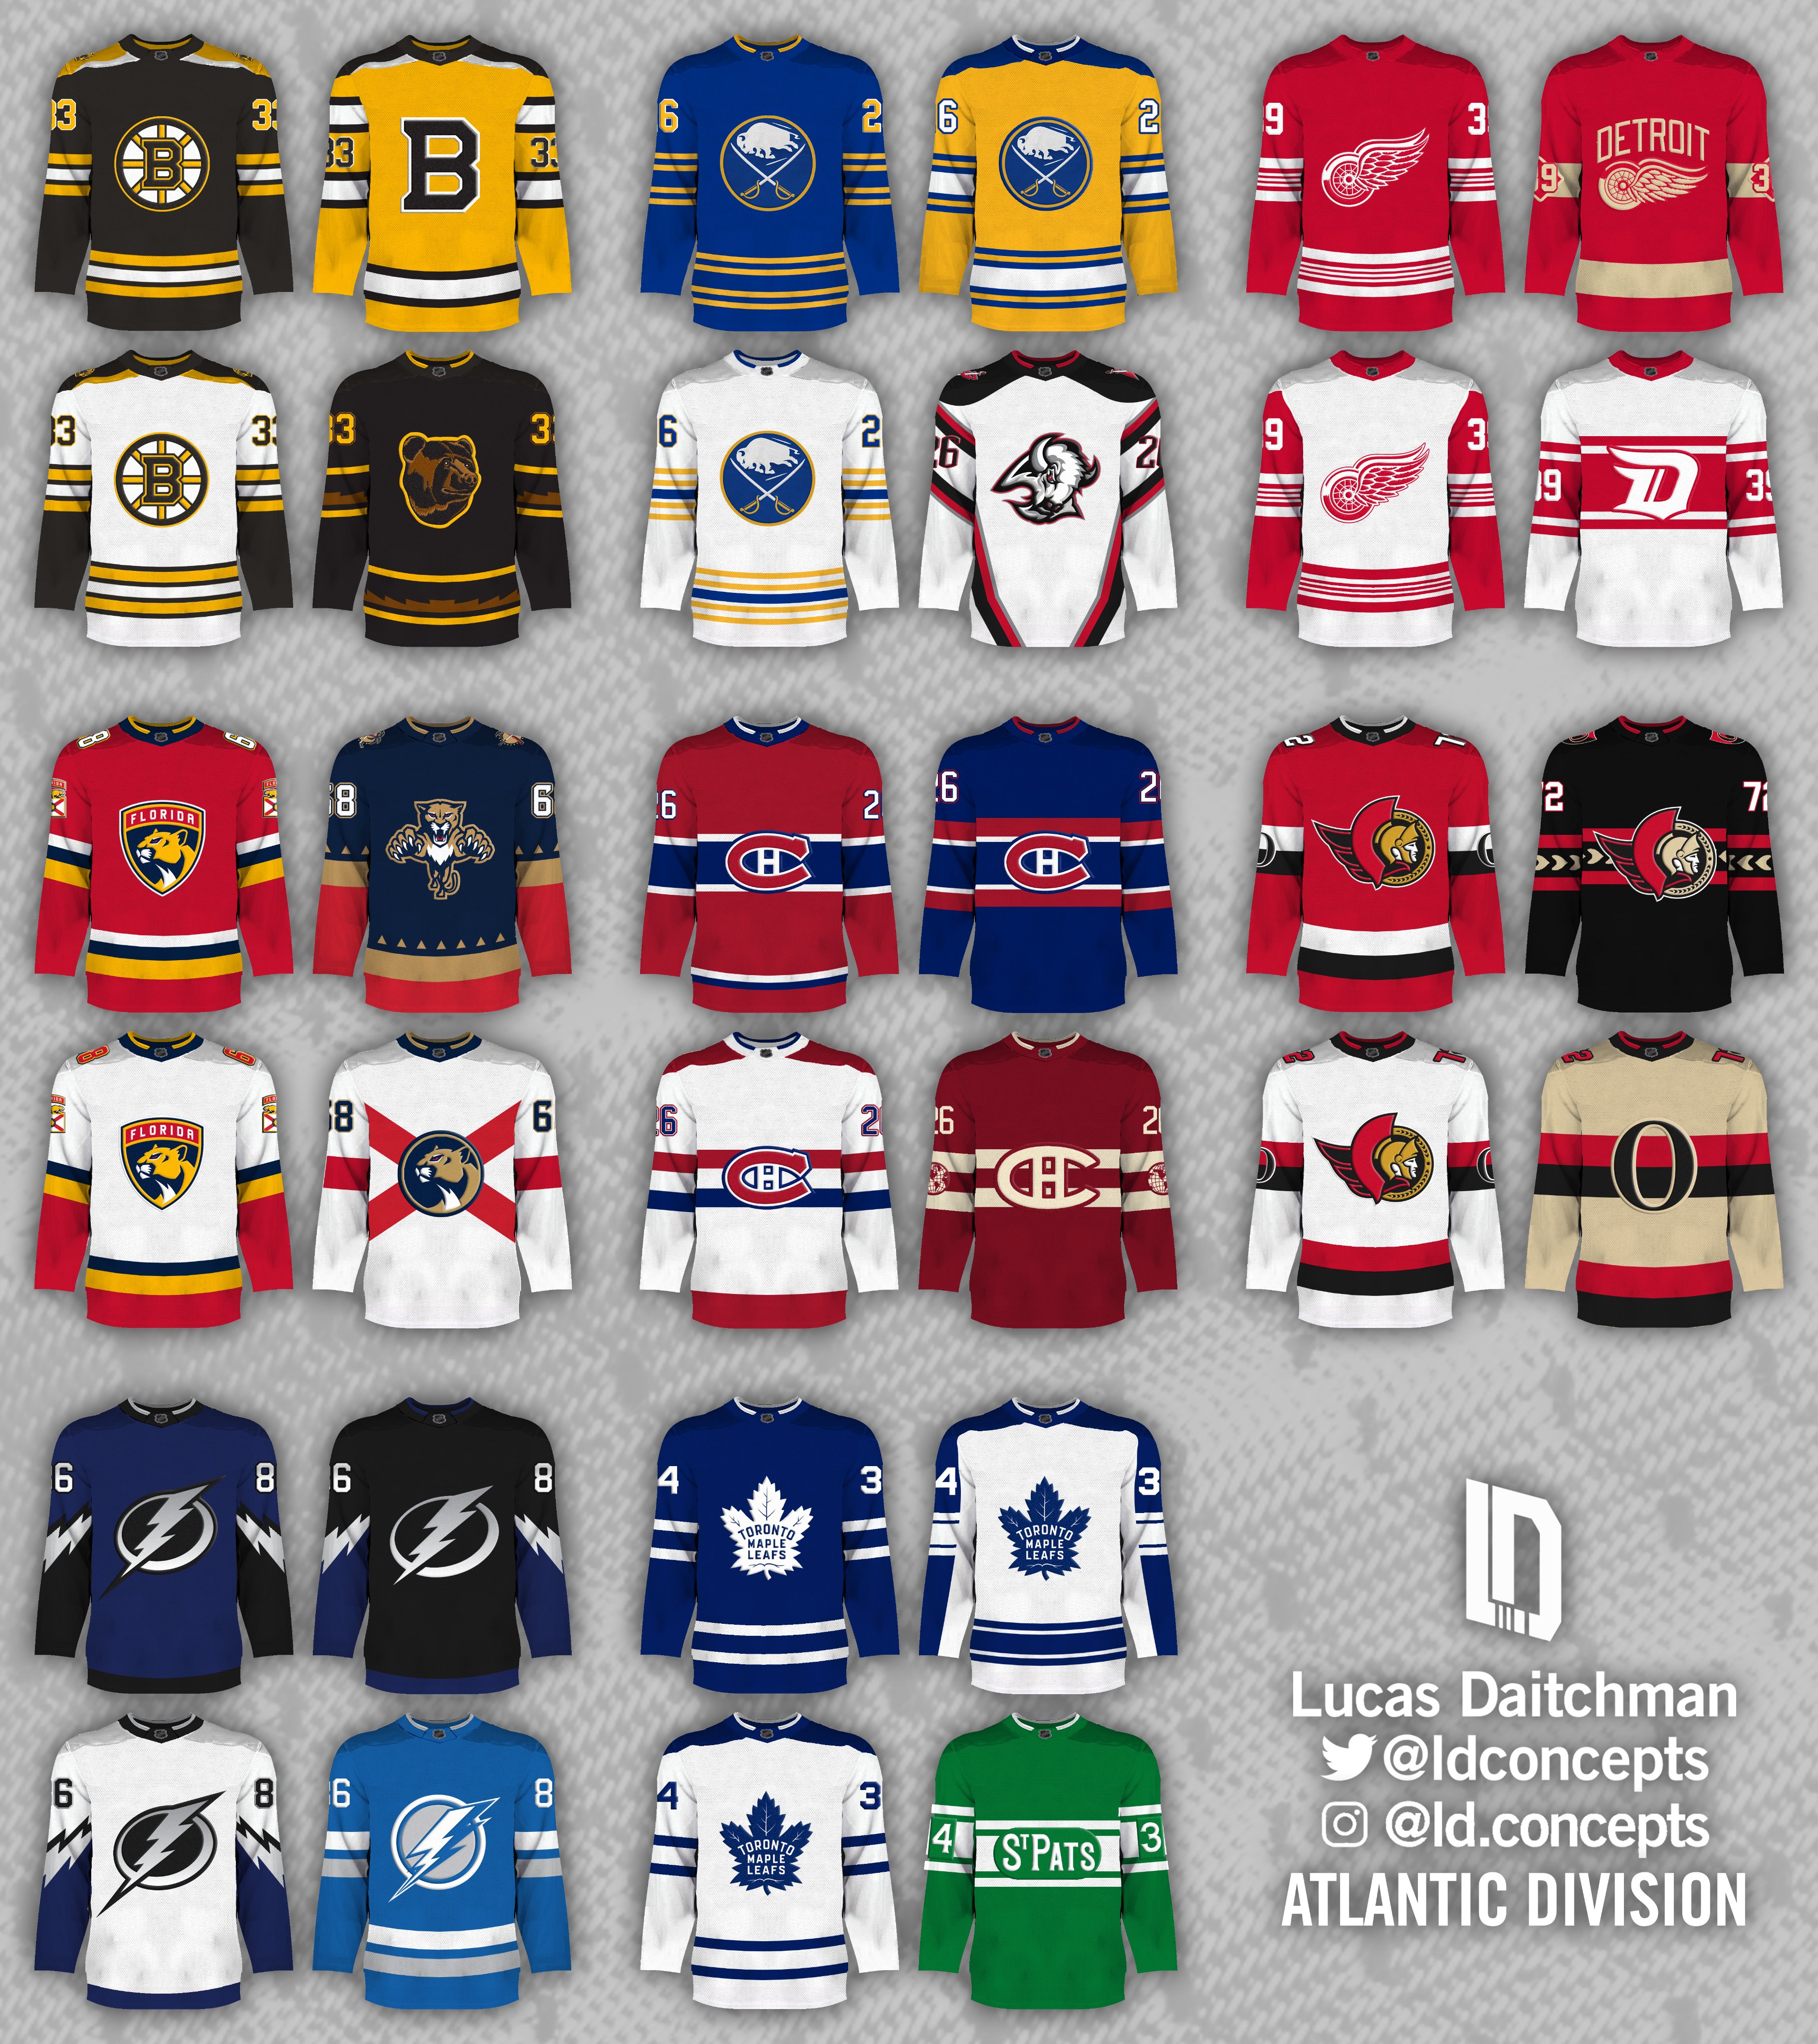 Made jersey concepts for each team as a little hobby, what do you think?  Eastern Conference : r/nhl